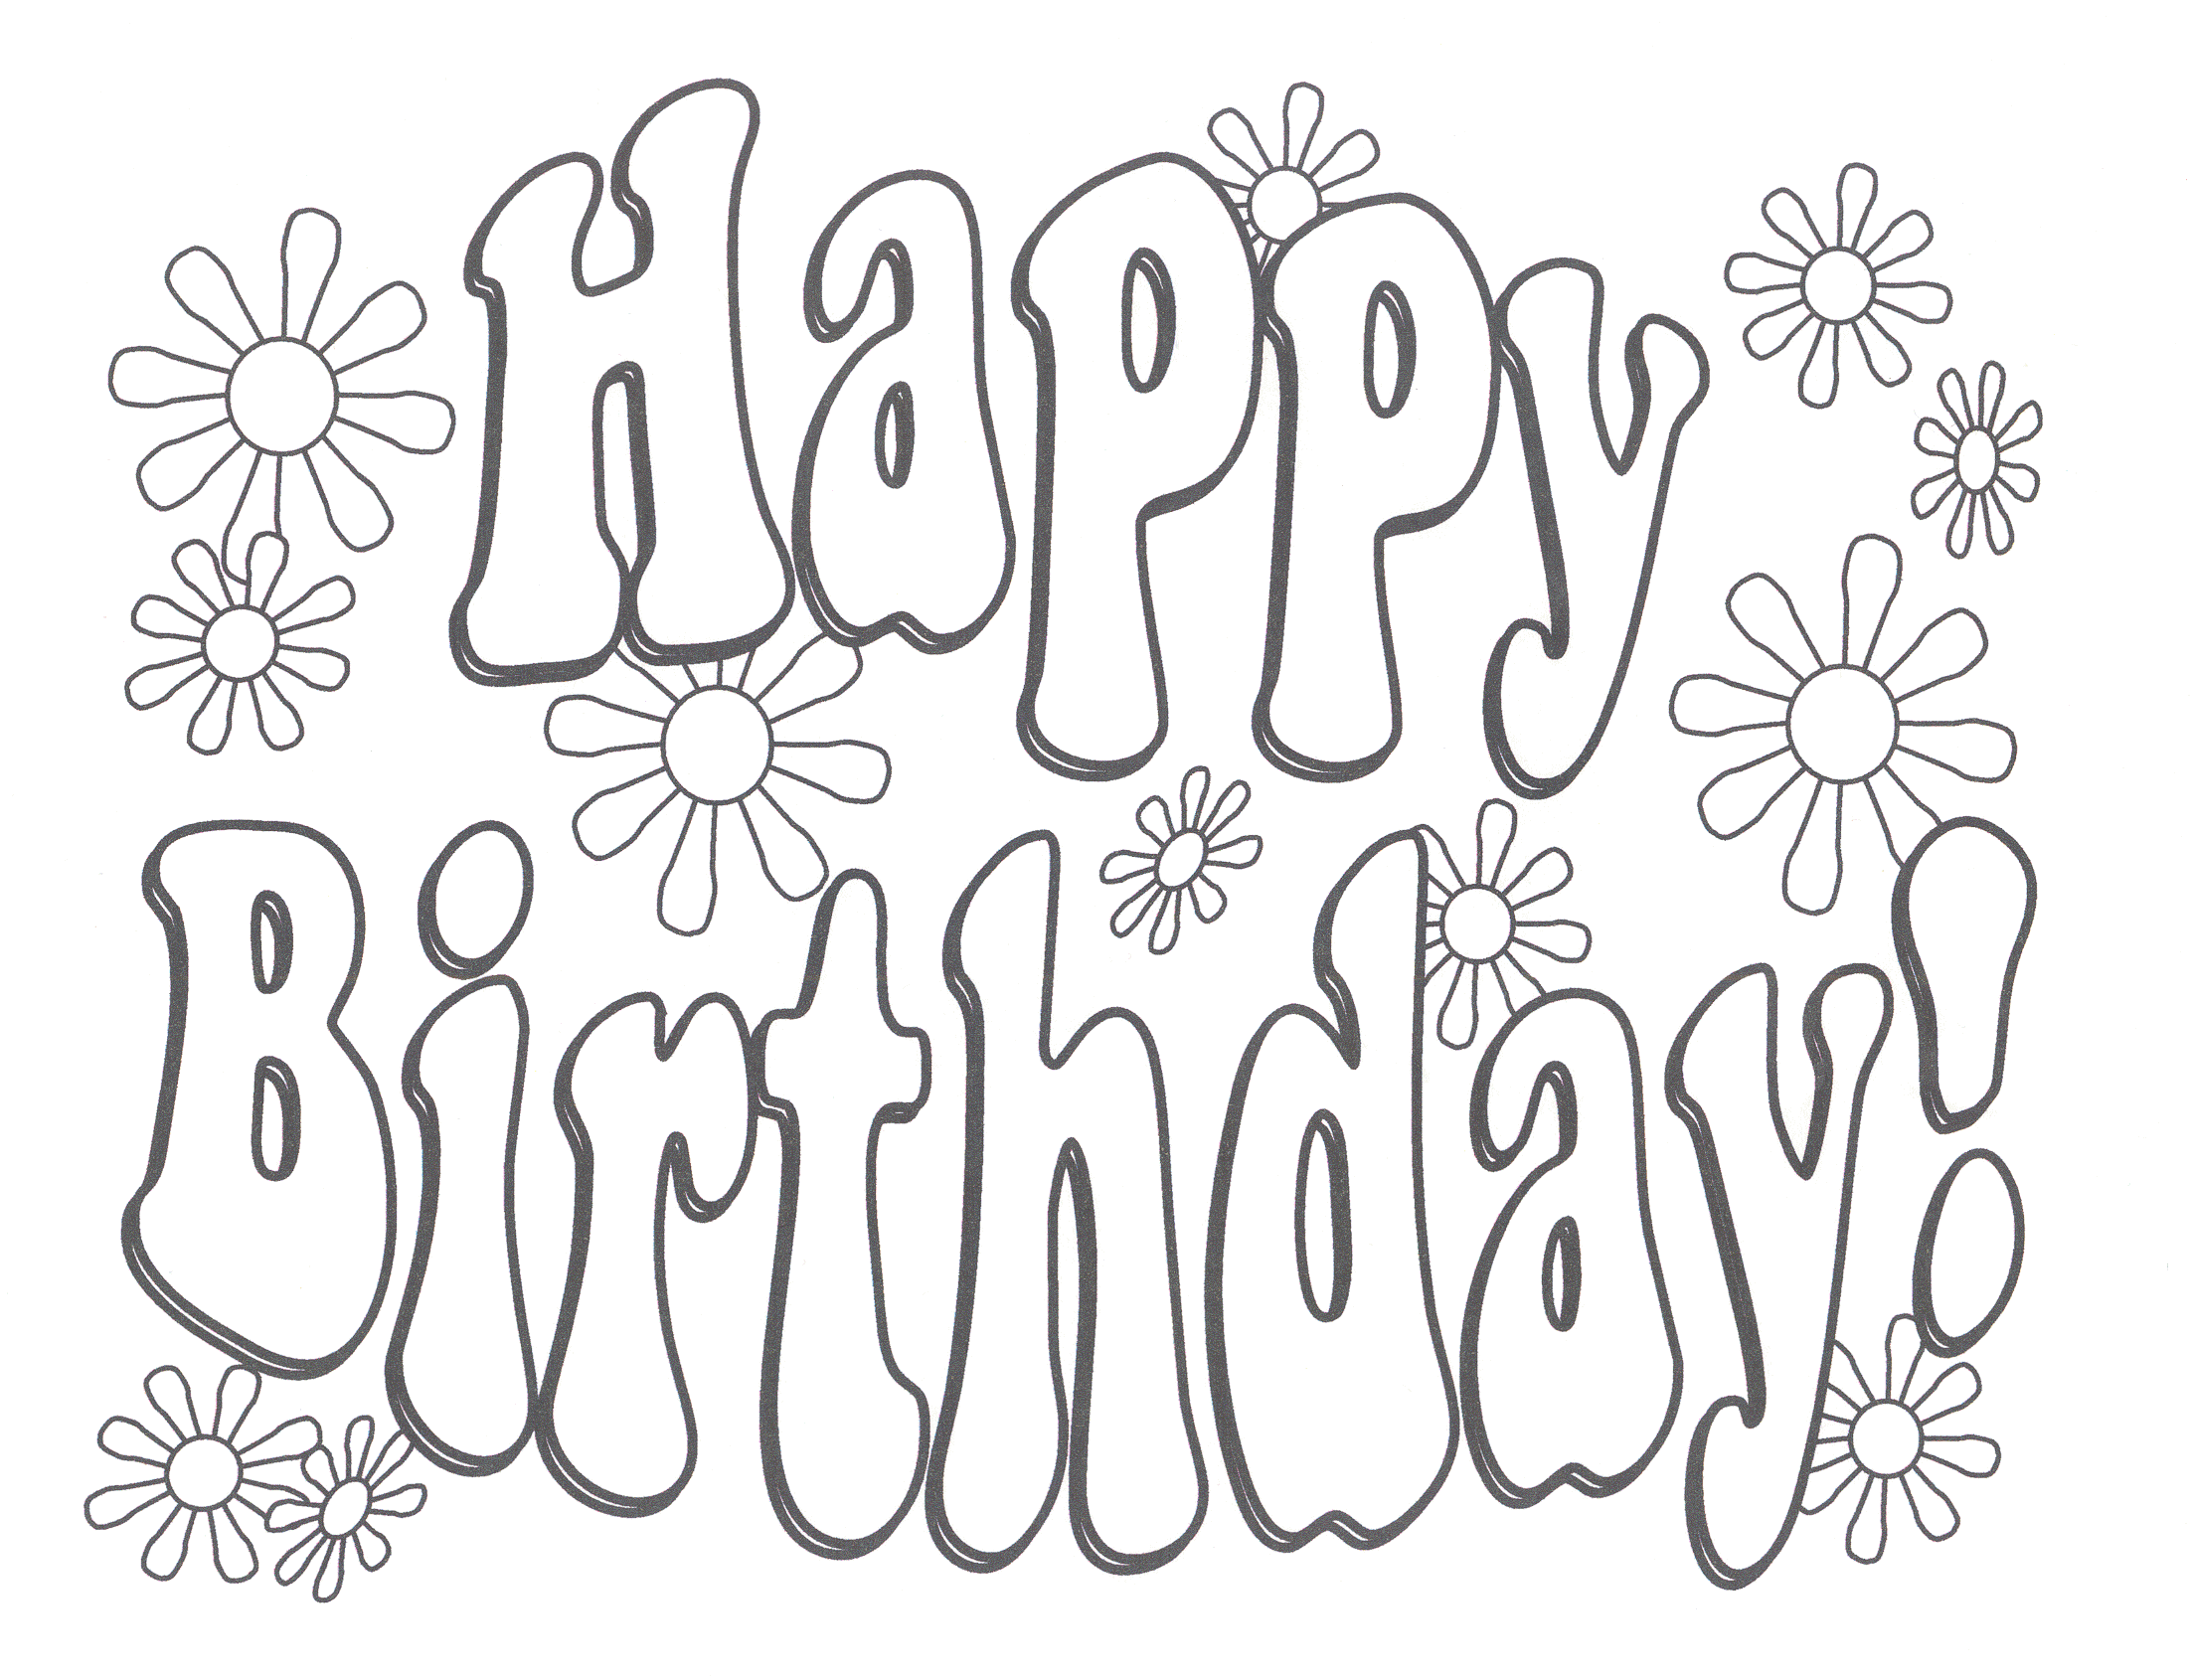 Birthday Printable - Coloring Pages for Kids and for Adults